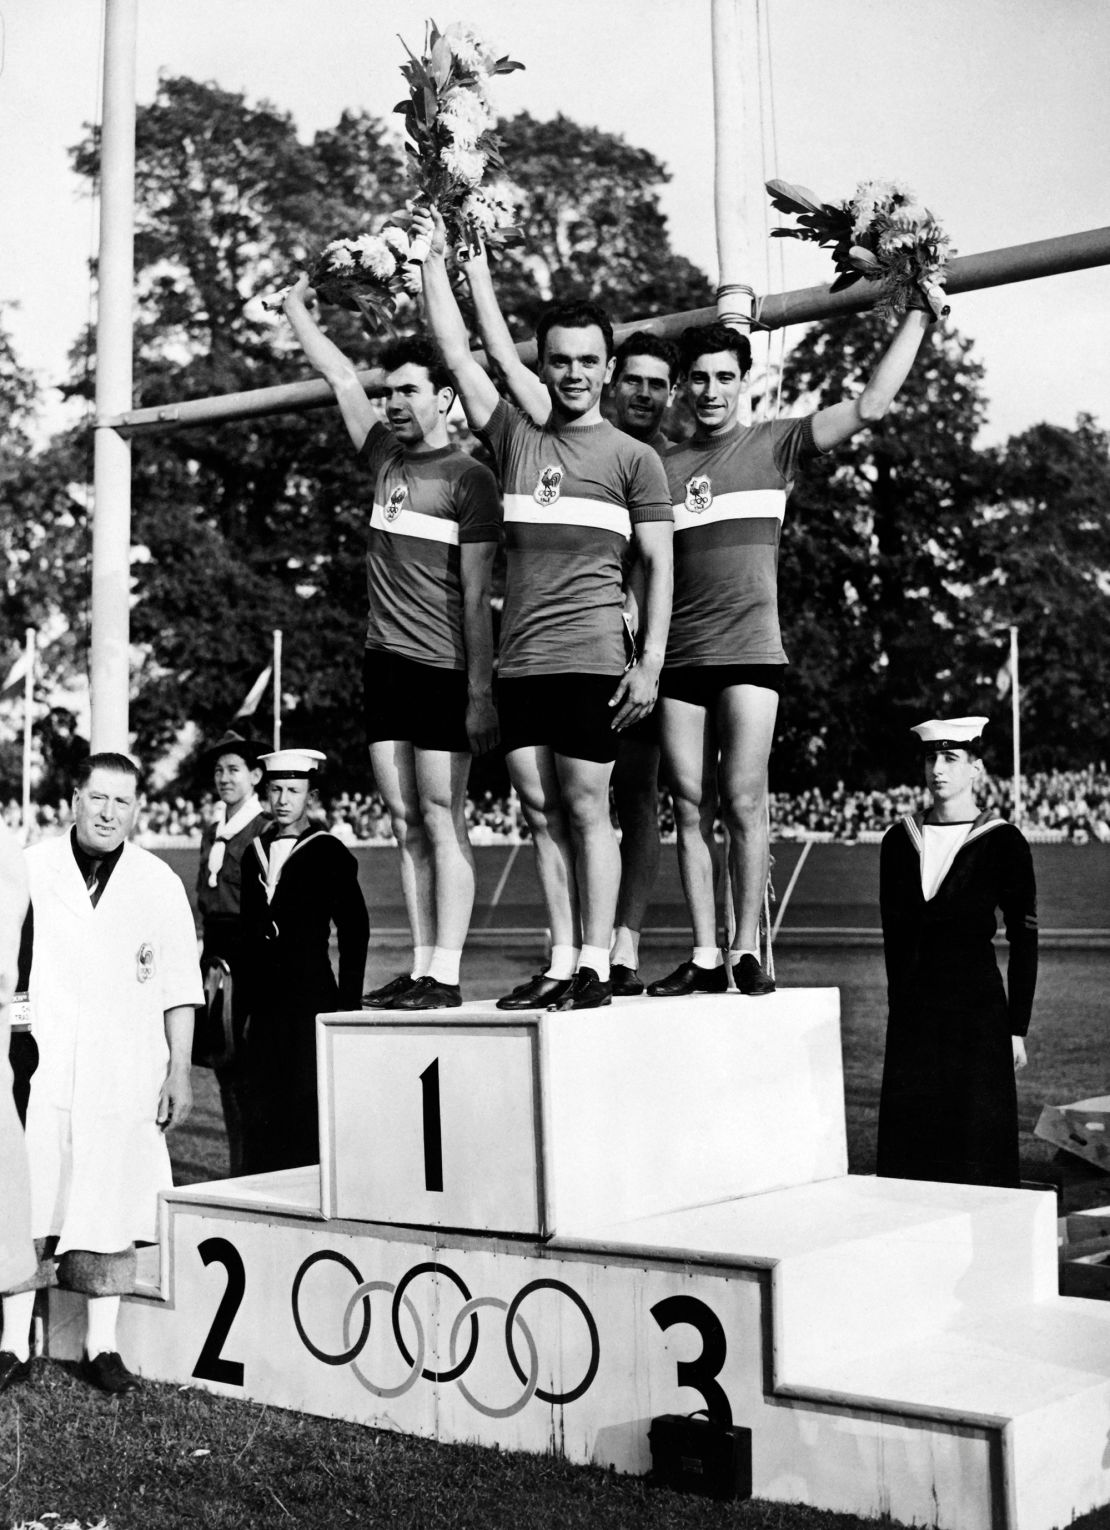 Fernand Decanali, Pierre Adam, Serge Blusson and Charles Coste stand atop the podium at the 1948 Olympics.